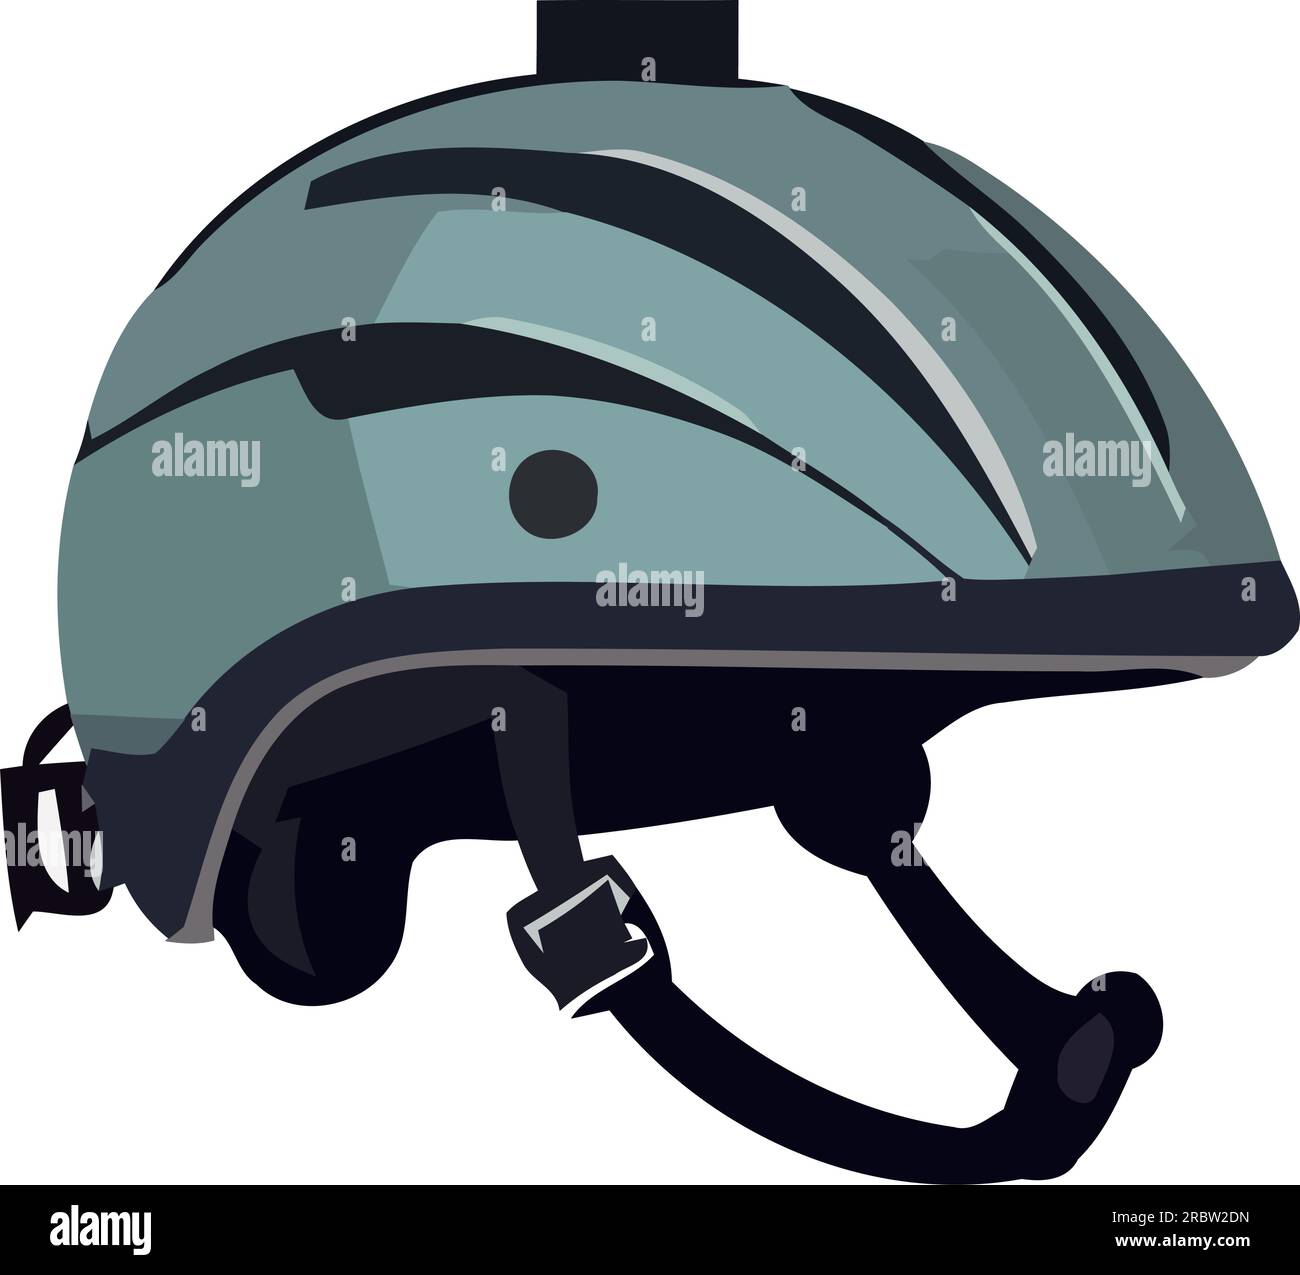 Protective cycling helmet illustration Stock Vector